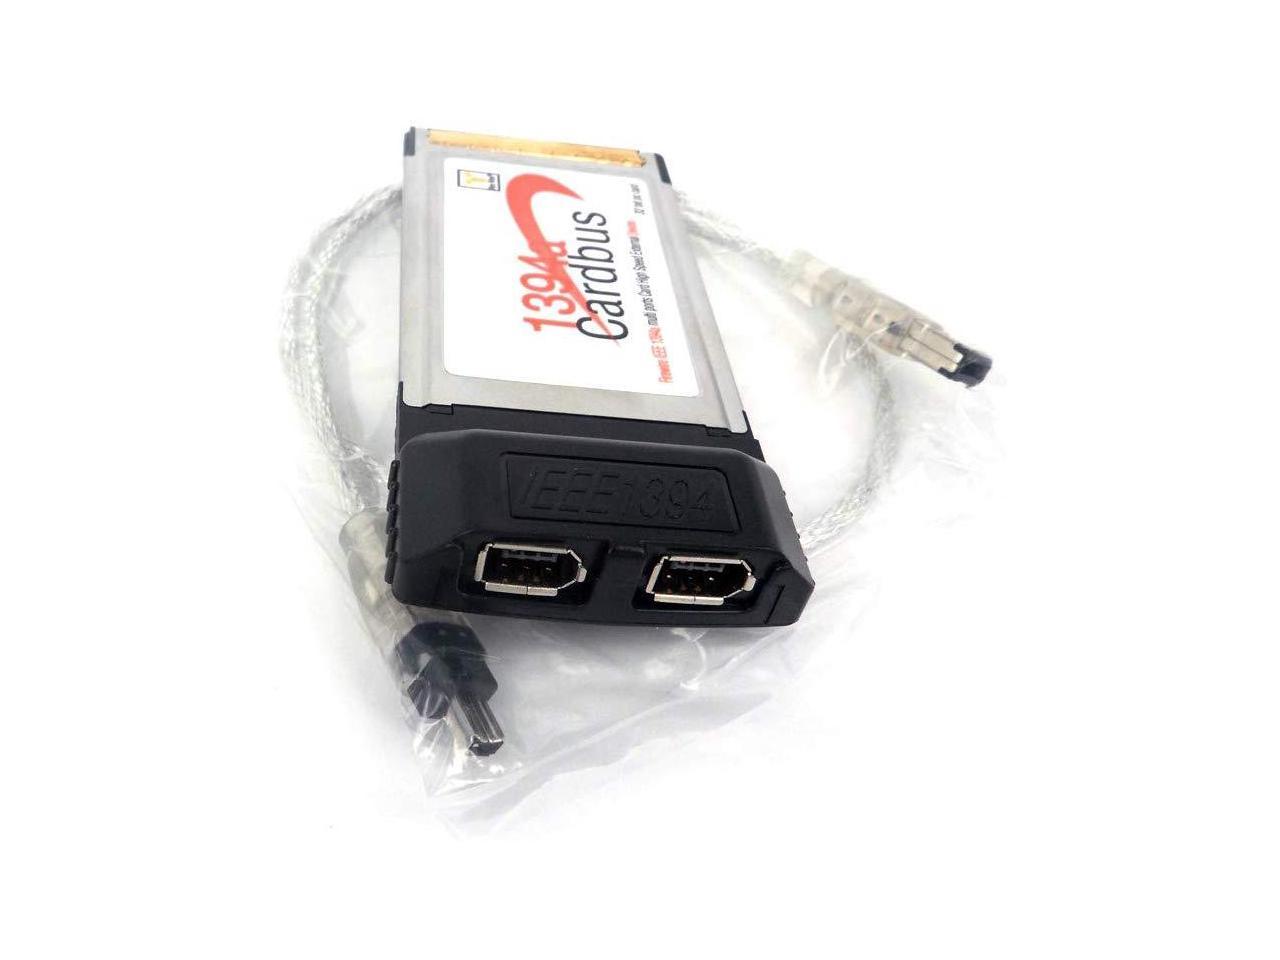 Conceptronic Ieee 1394 Firewire Pc Card Drivers